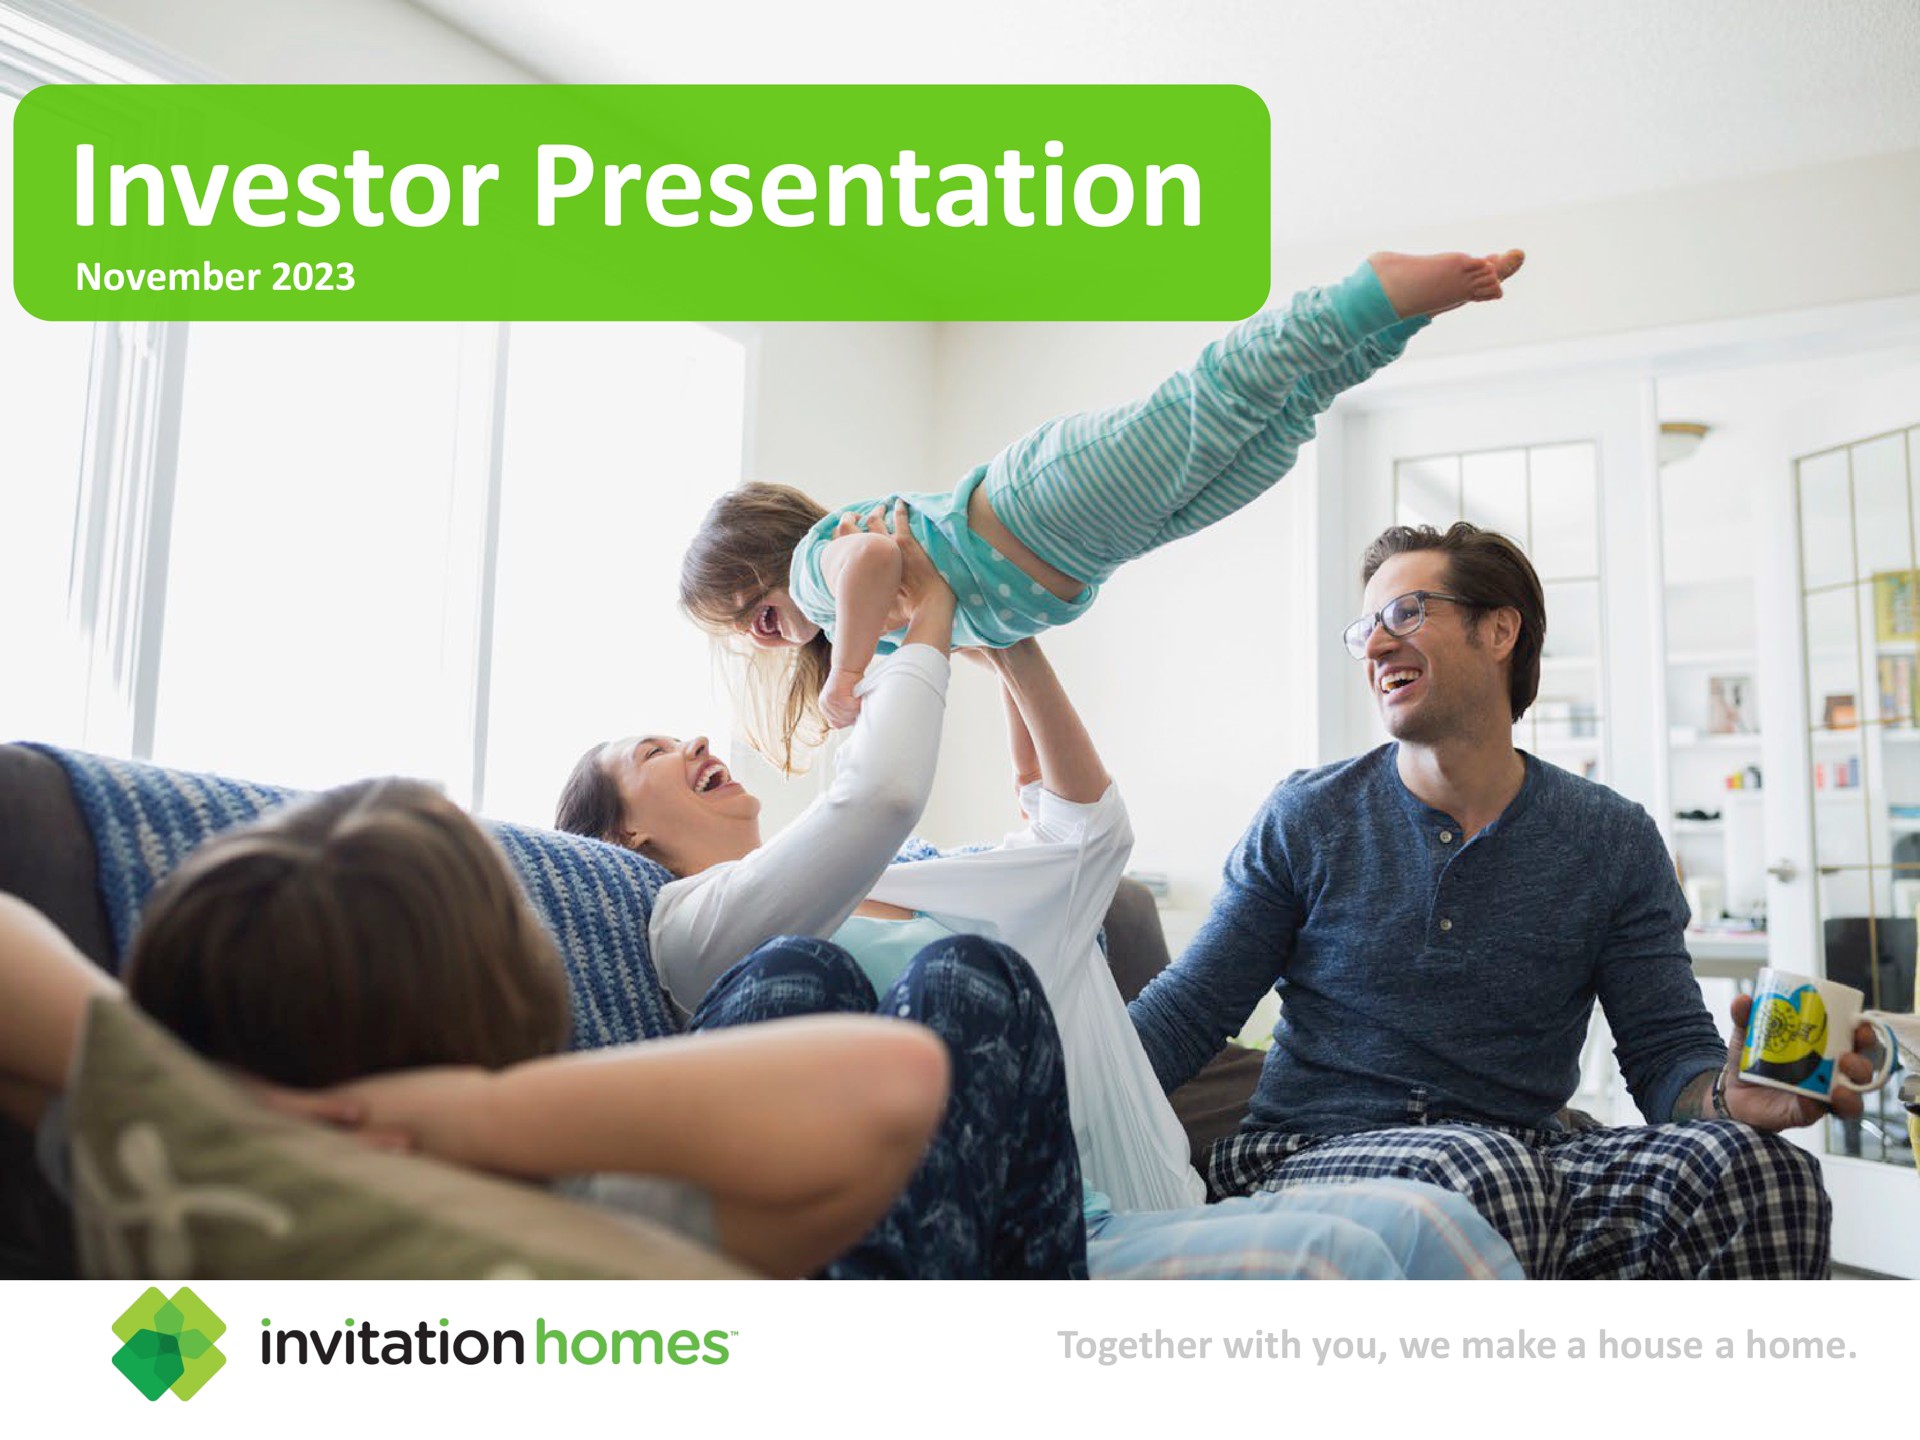 investor presentation together with you we make a house a home | Invitation Homes